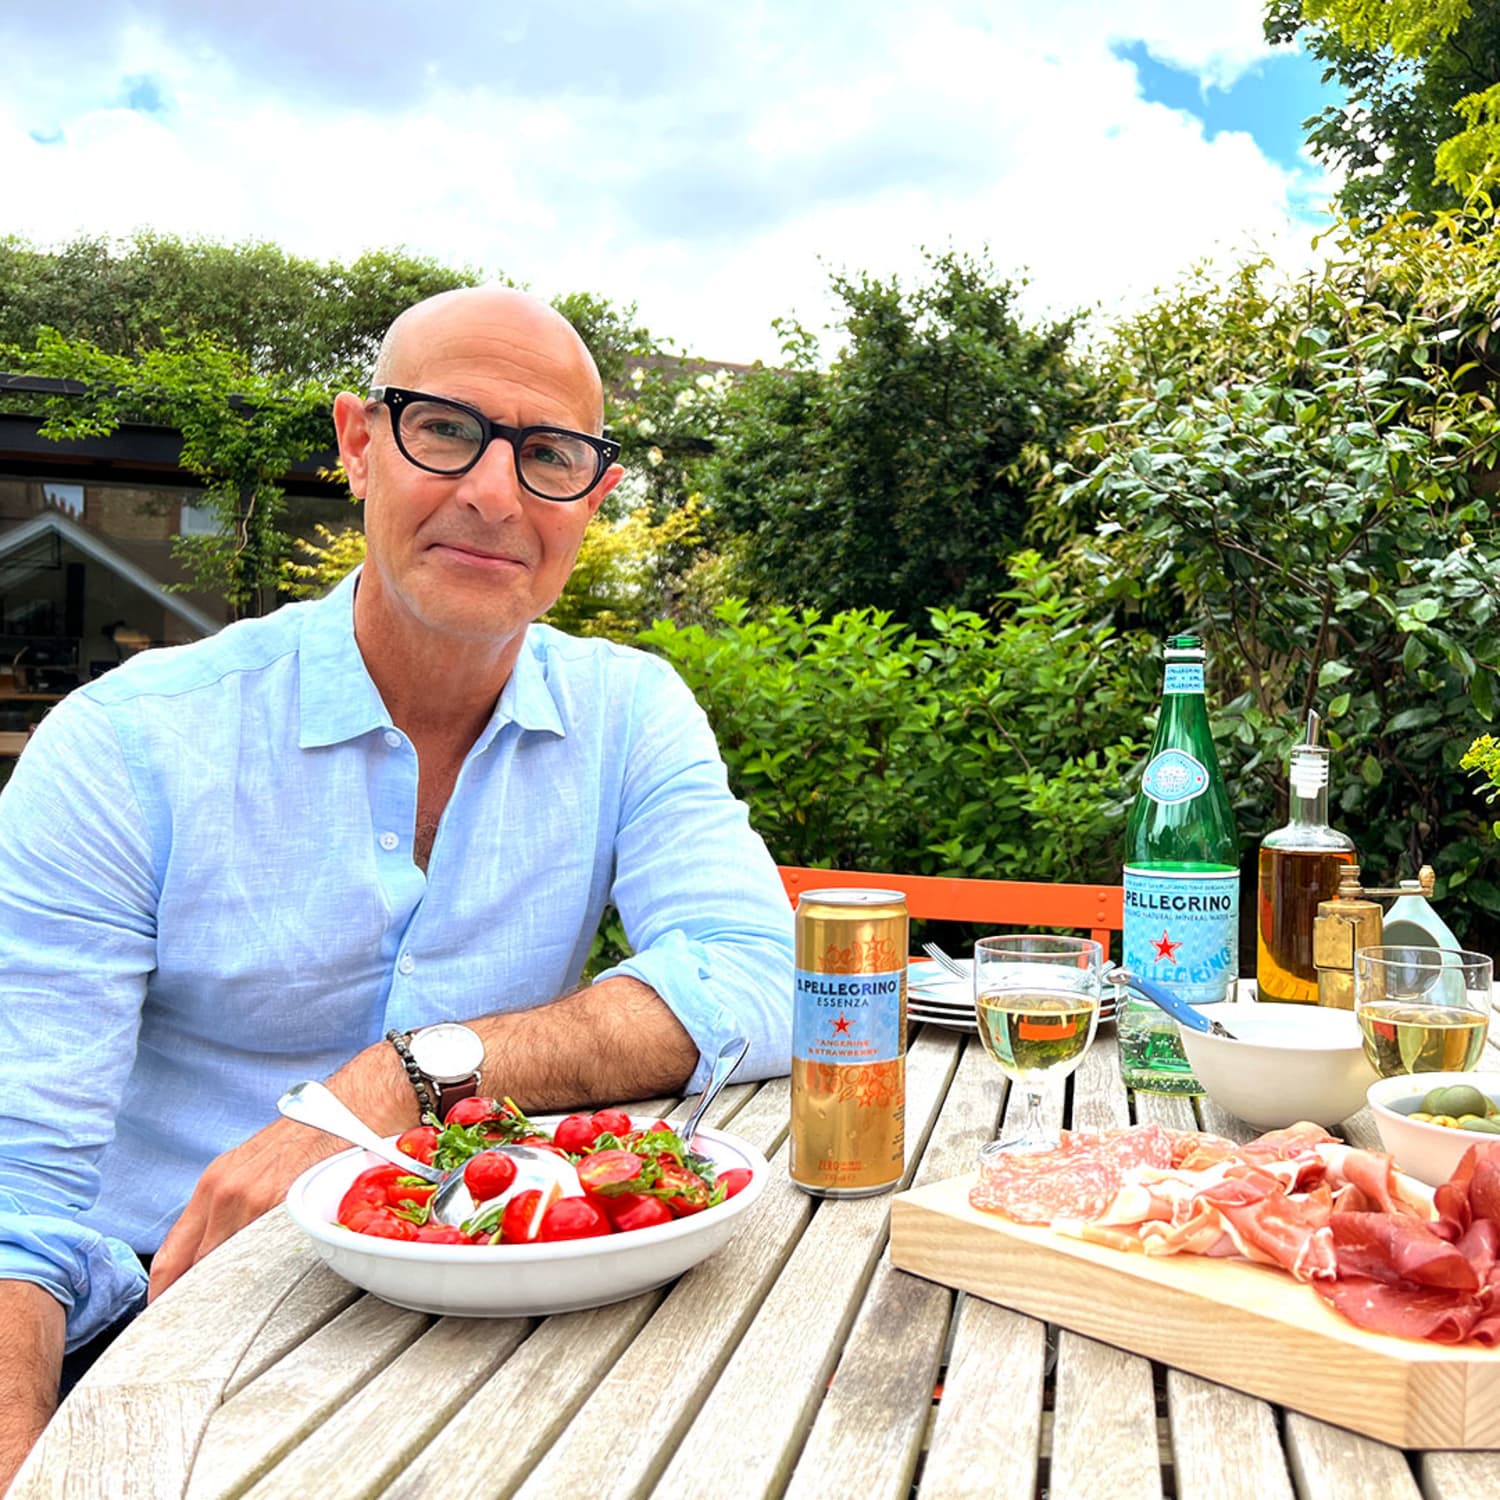 Stanley Tucci and S.Pellegrino Launch Holiday Recipe Kit With